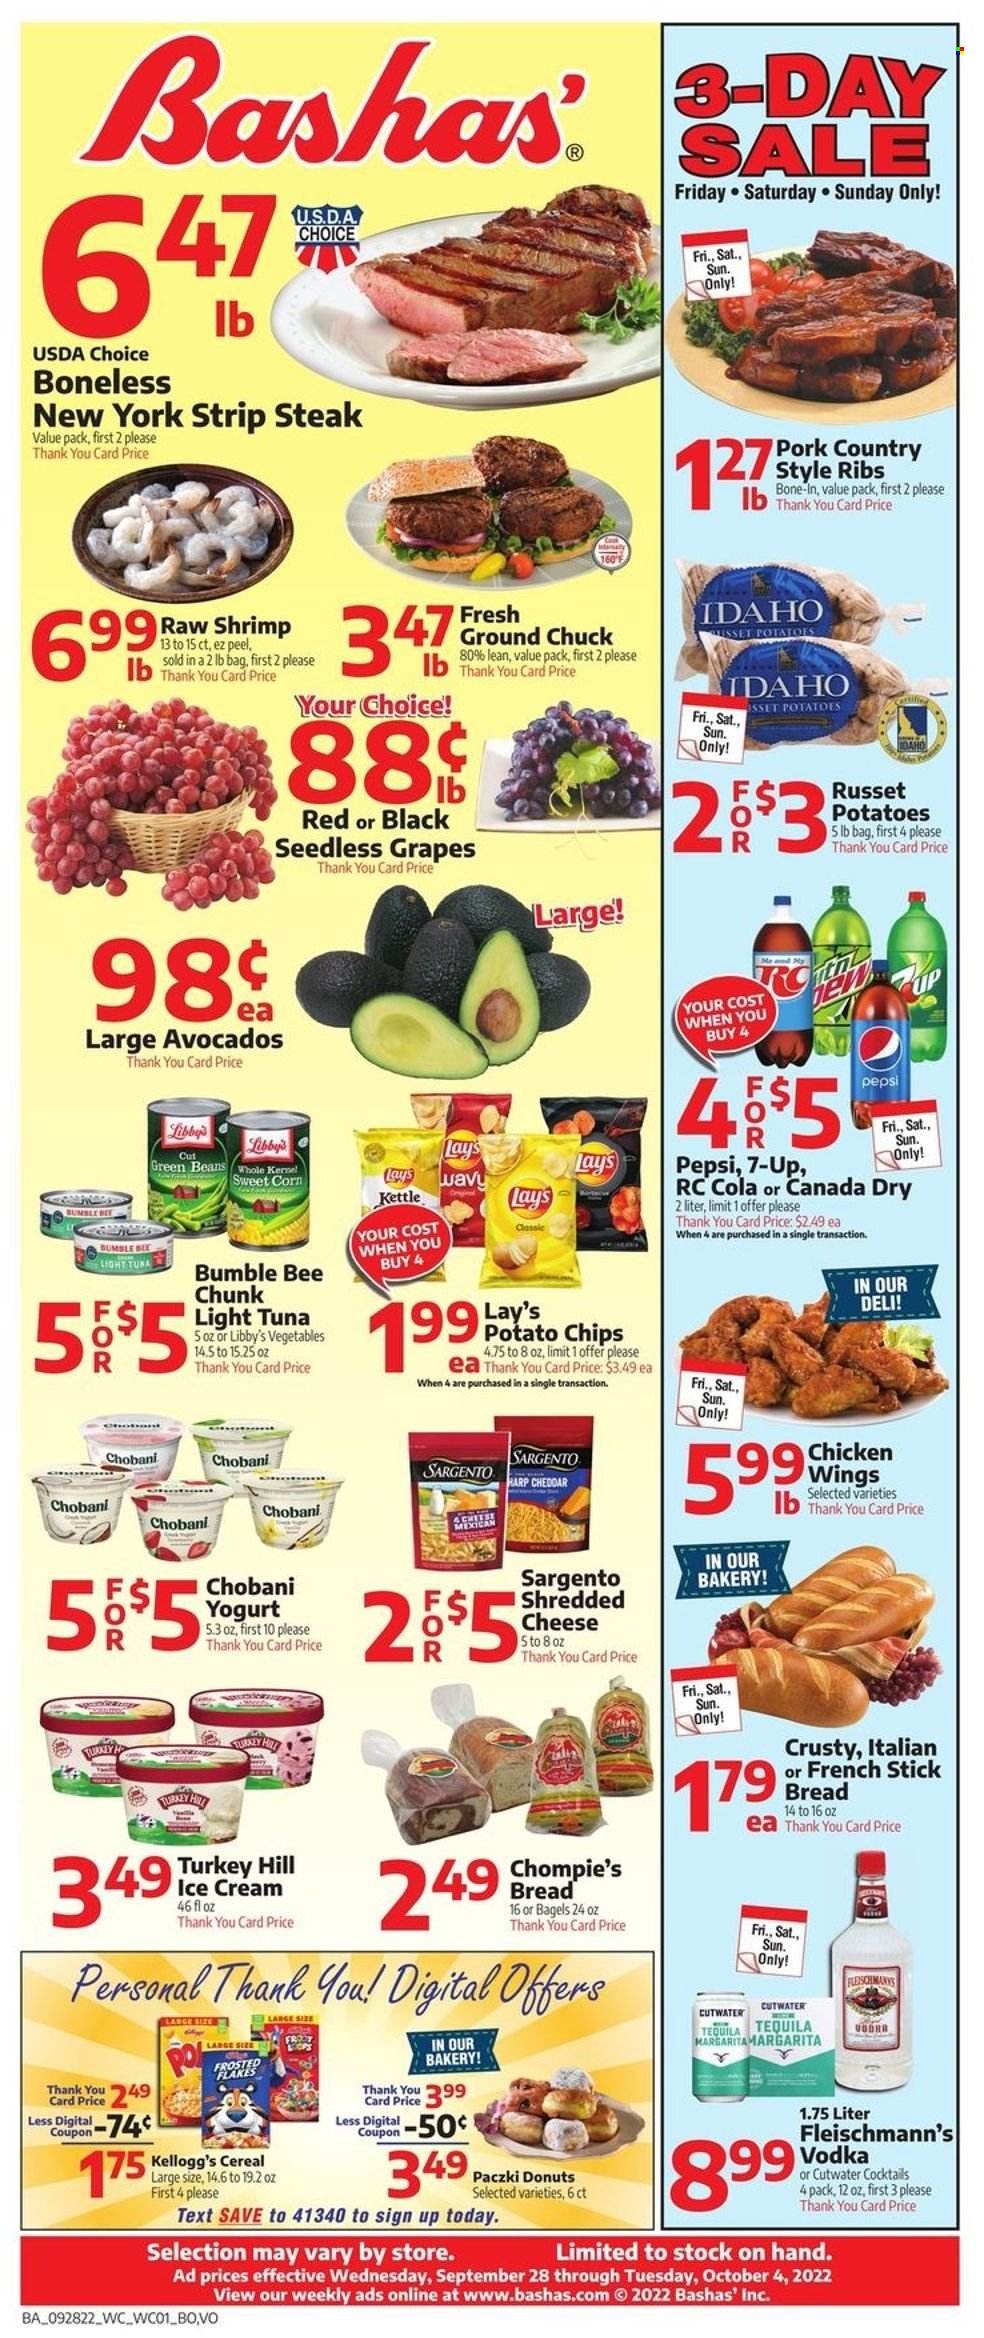 thumbnail - Bashas' Flyer - 09/28/2022 - 10/04/2022 - Sales products - bagels, bread, donut, paczki, beans, corn, russet potatoes, sweet corn, avocado, grapes, seedless grapes, tuna, shrimps, Bumble Bee, shredded cheese, Sargento, yoghurt, Chobani, ice cream, Kellogg's, potato chips, chips, Lay’s, light tuna, cereals, Frosted Flakes, Canada Dry, Pepsi, 7UP, tequila, vodka, beef meat, ground chuck, steak, striploin steak, pork ribs, country style ribs. Page 1.